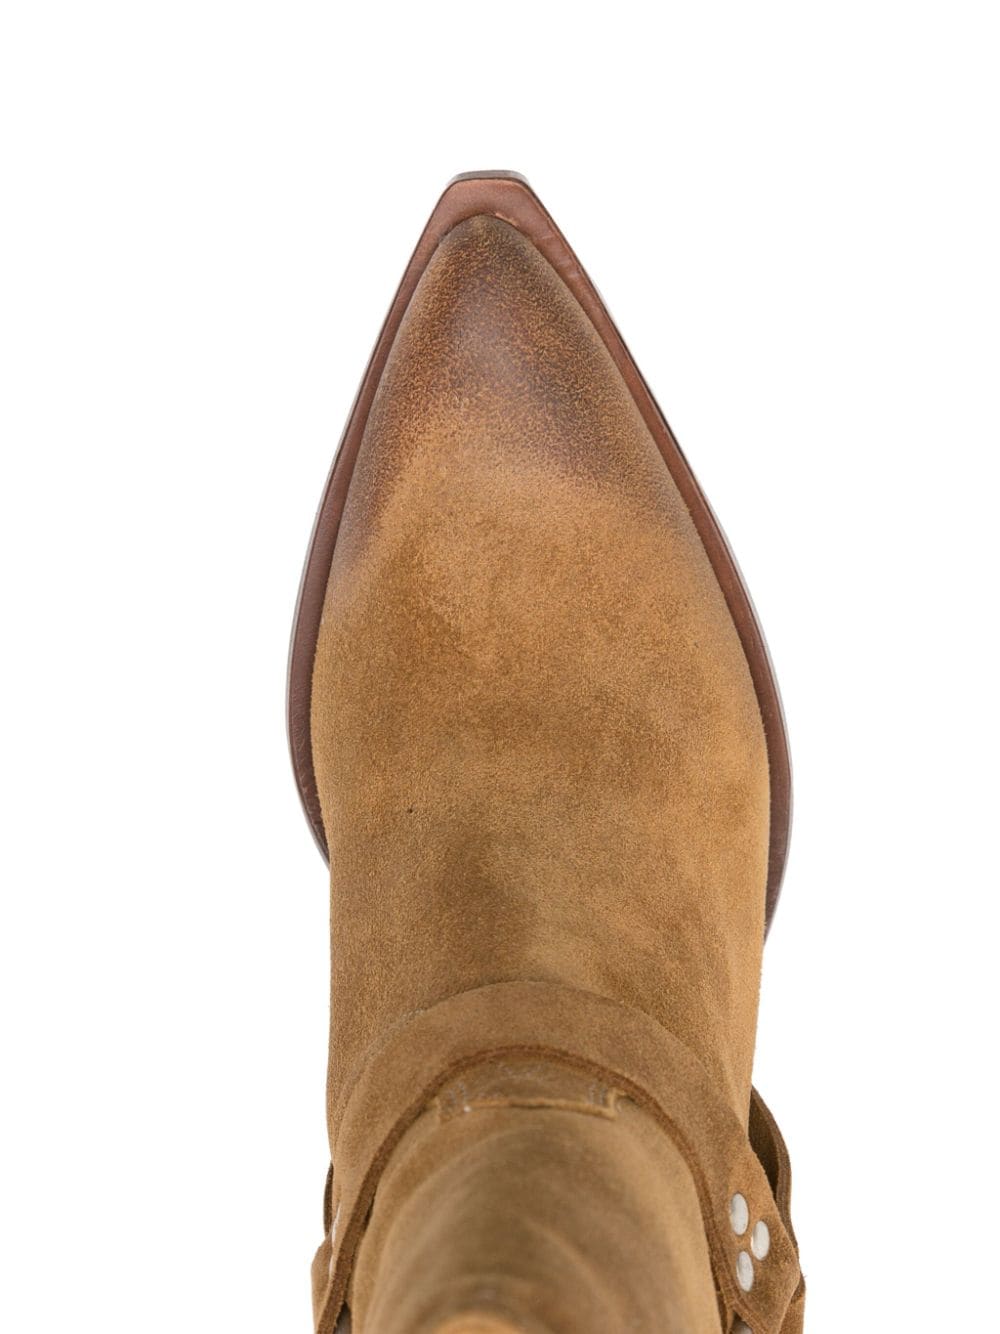 Sonora SONORA- Suede Texan Boots